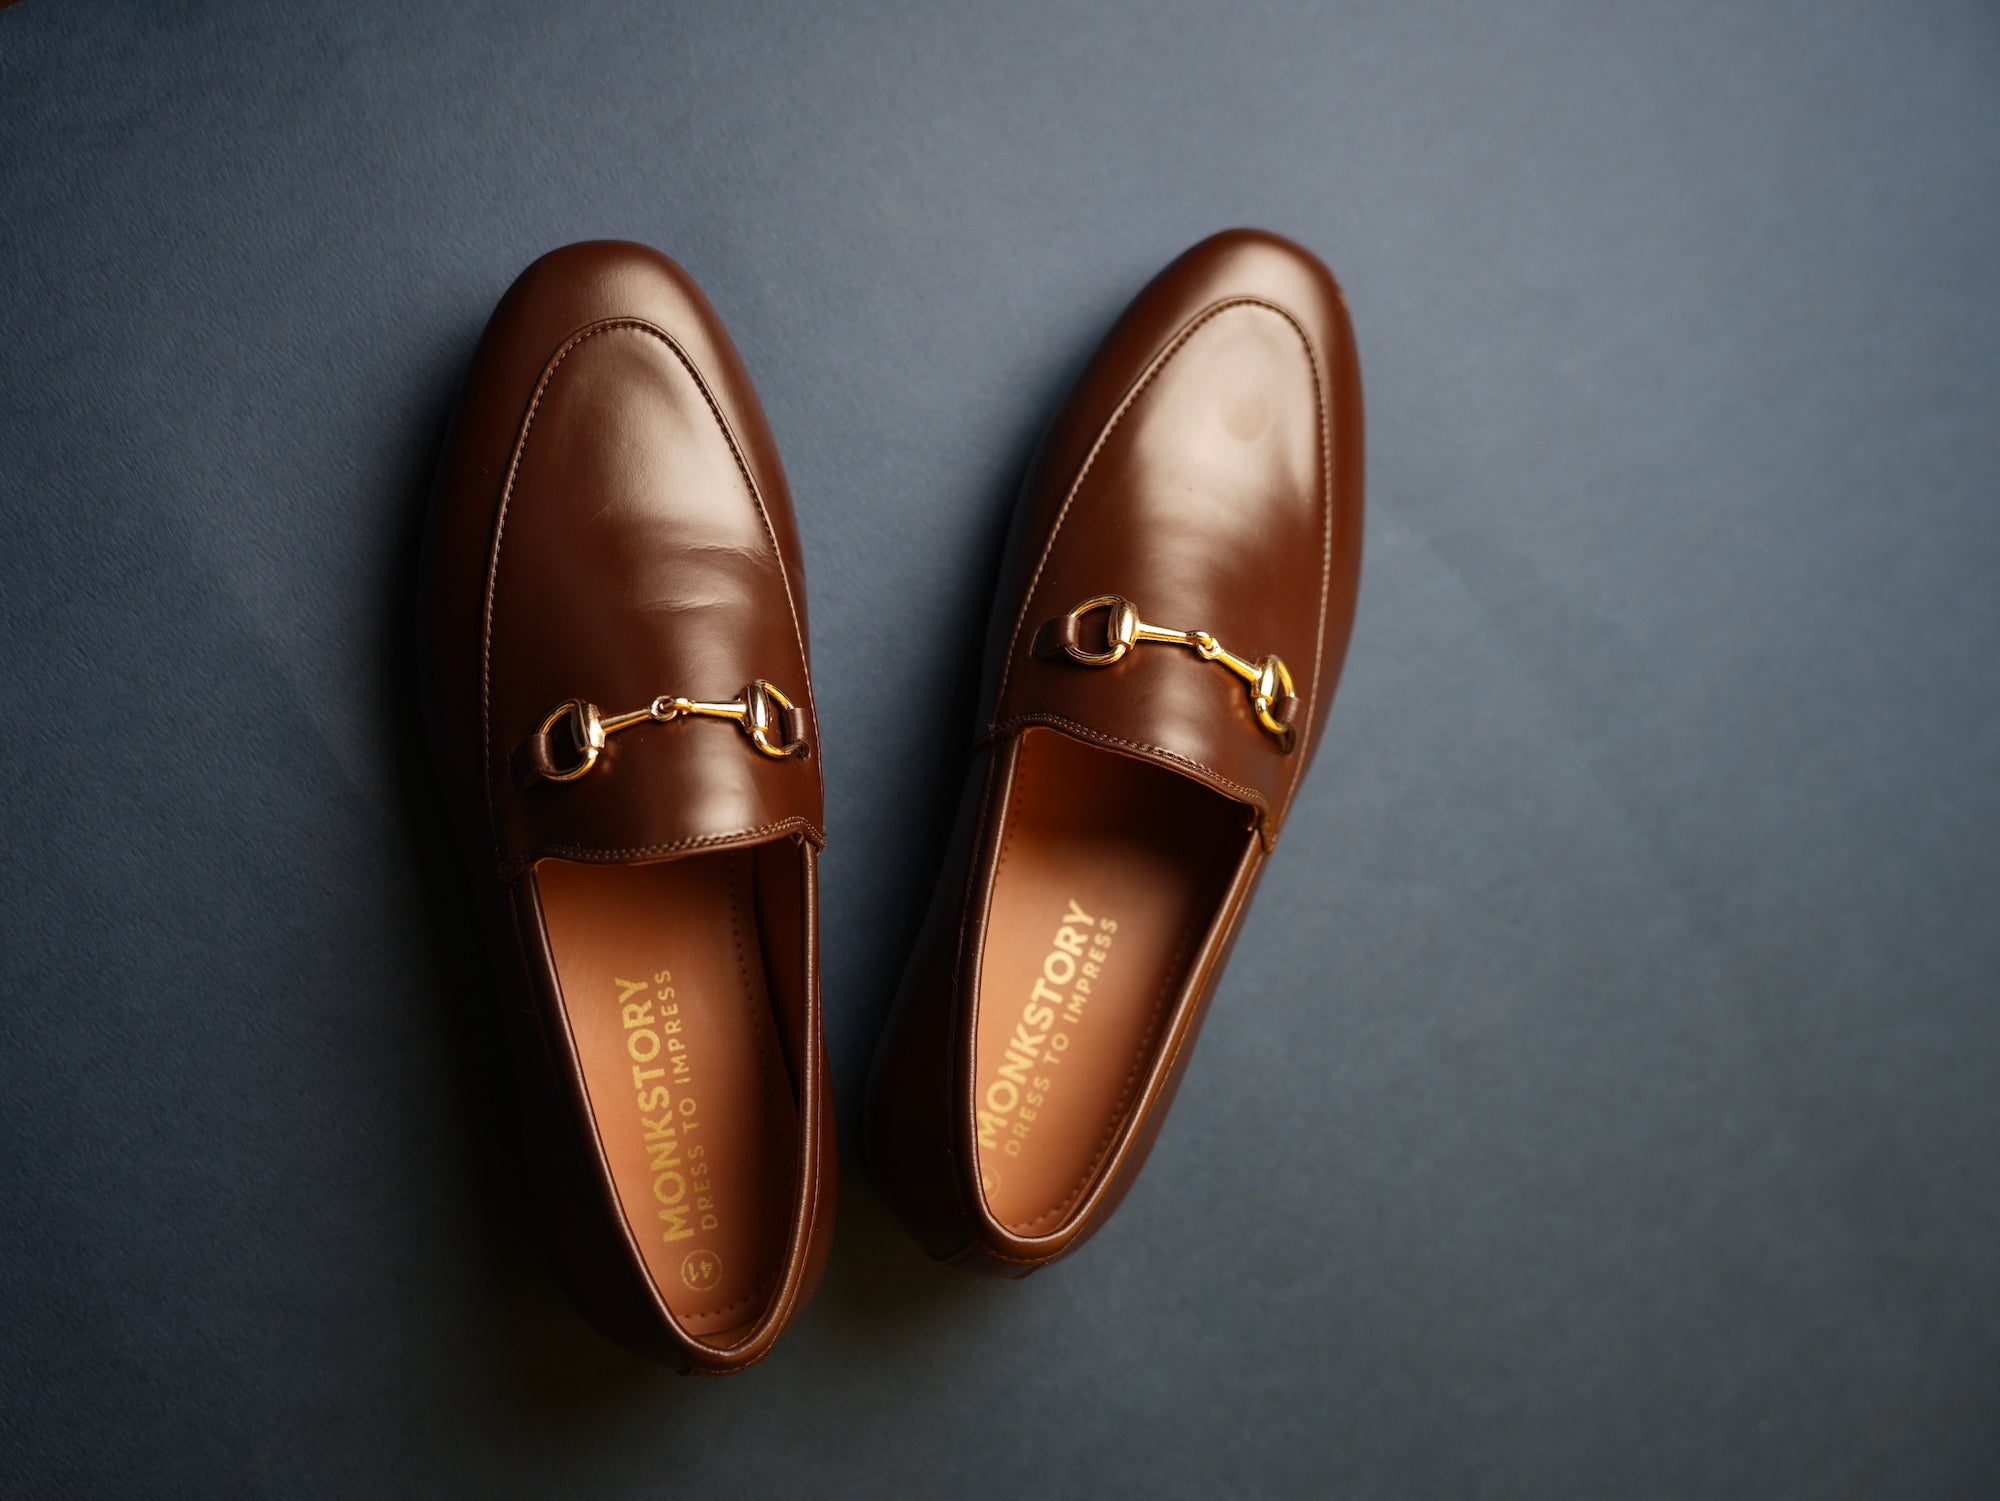 A pair of brown leather loafers with gold-tone horsebit detailing displayed on a dark background.